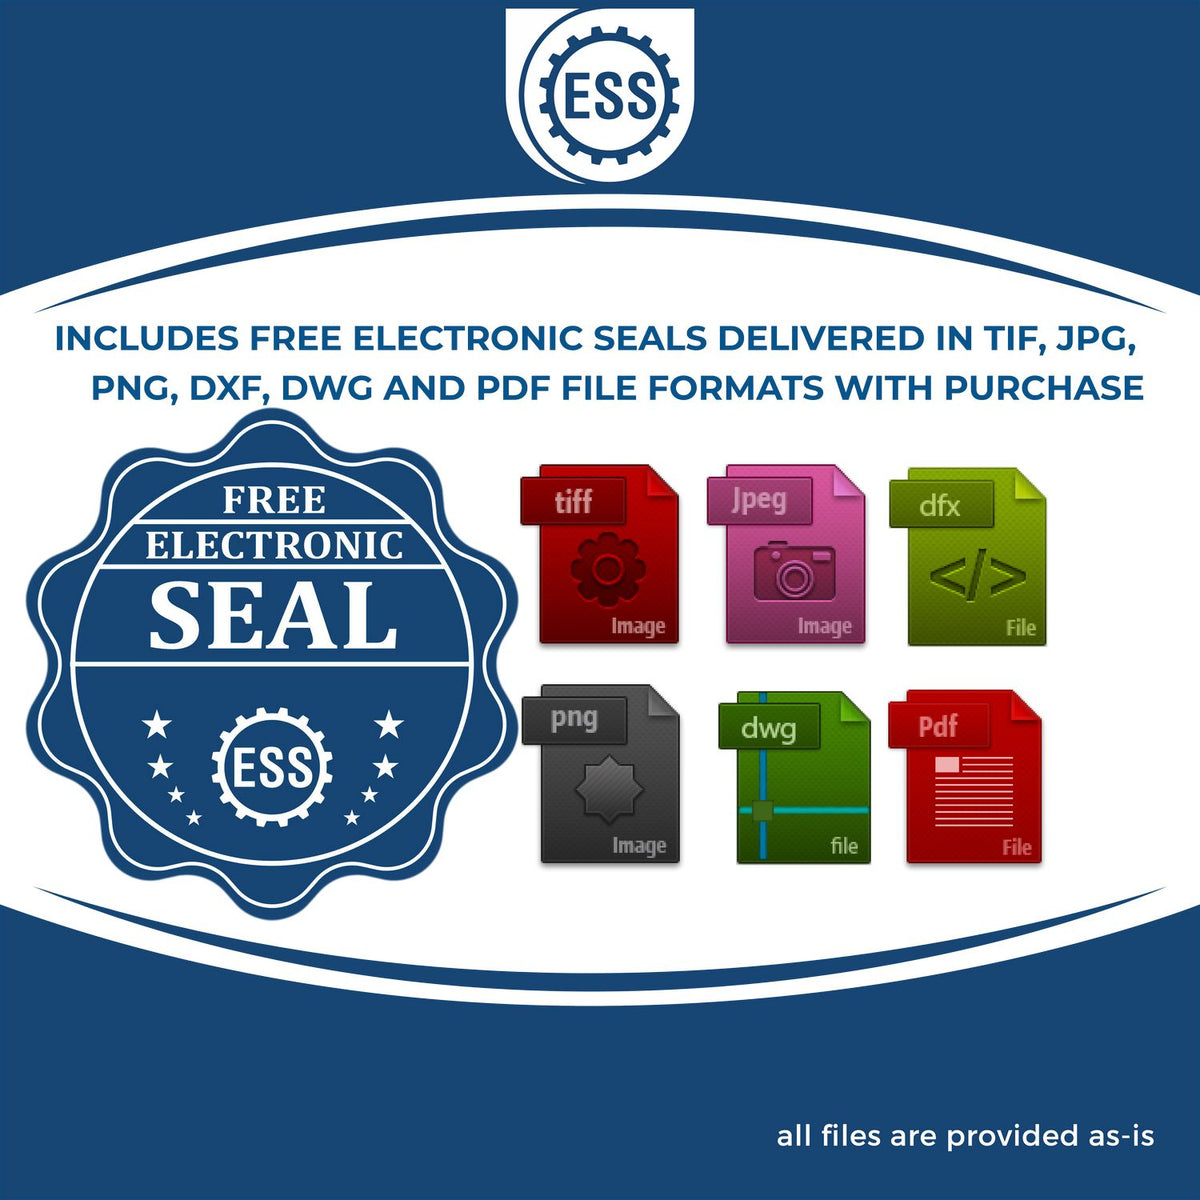 An infographic for the free electronic seal for the Self-Inking Pennsylvania PE Stamp illustrating the different file type icons such as DXF, DWG, TIF, JPG and PNG.